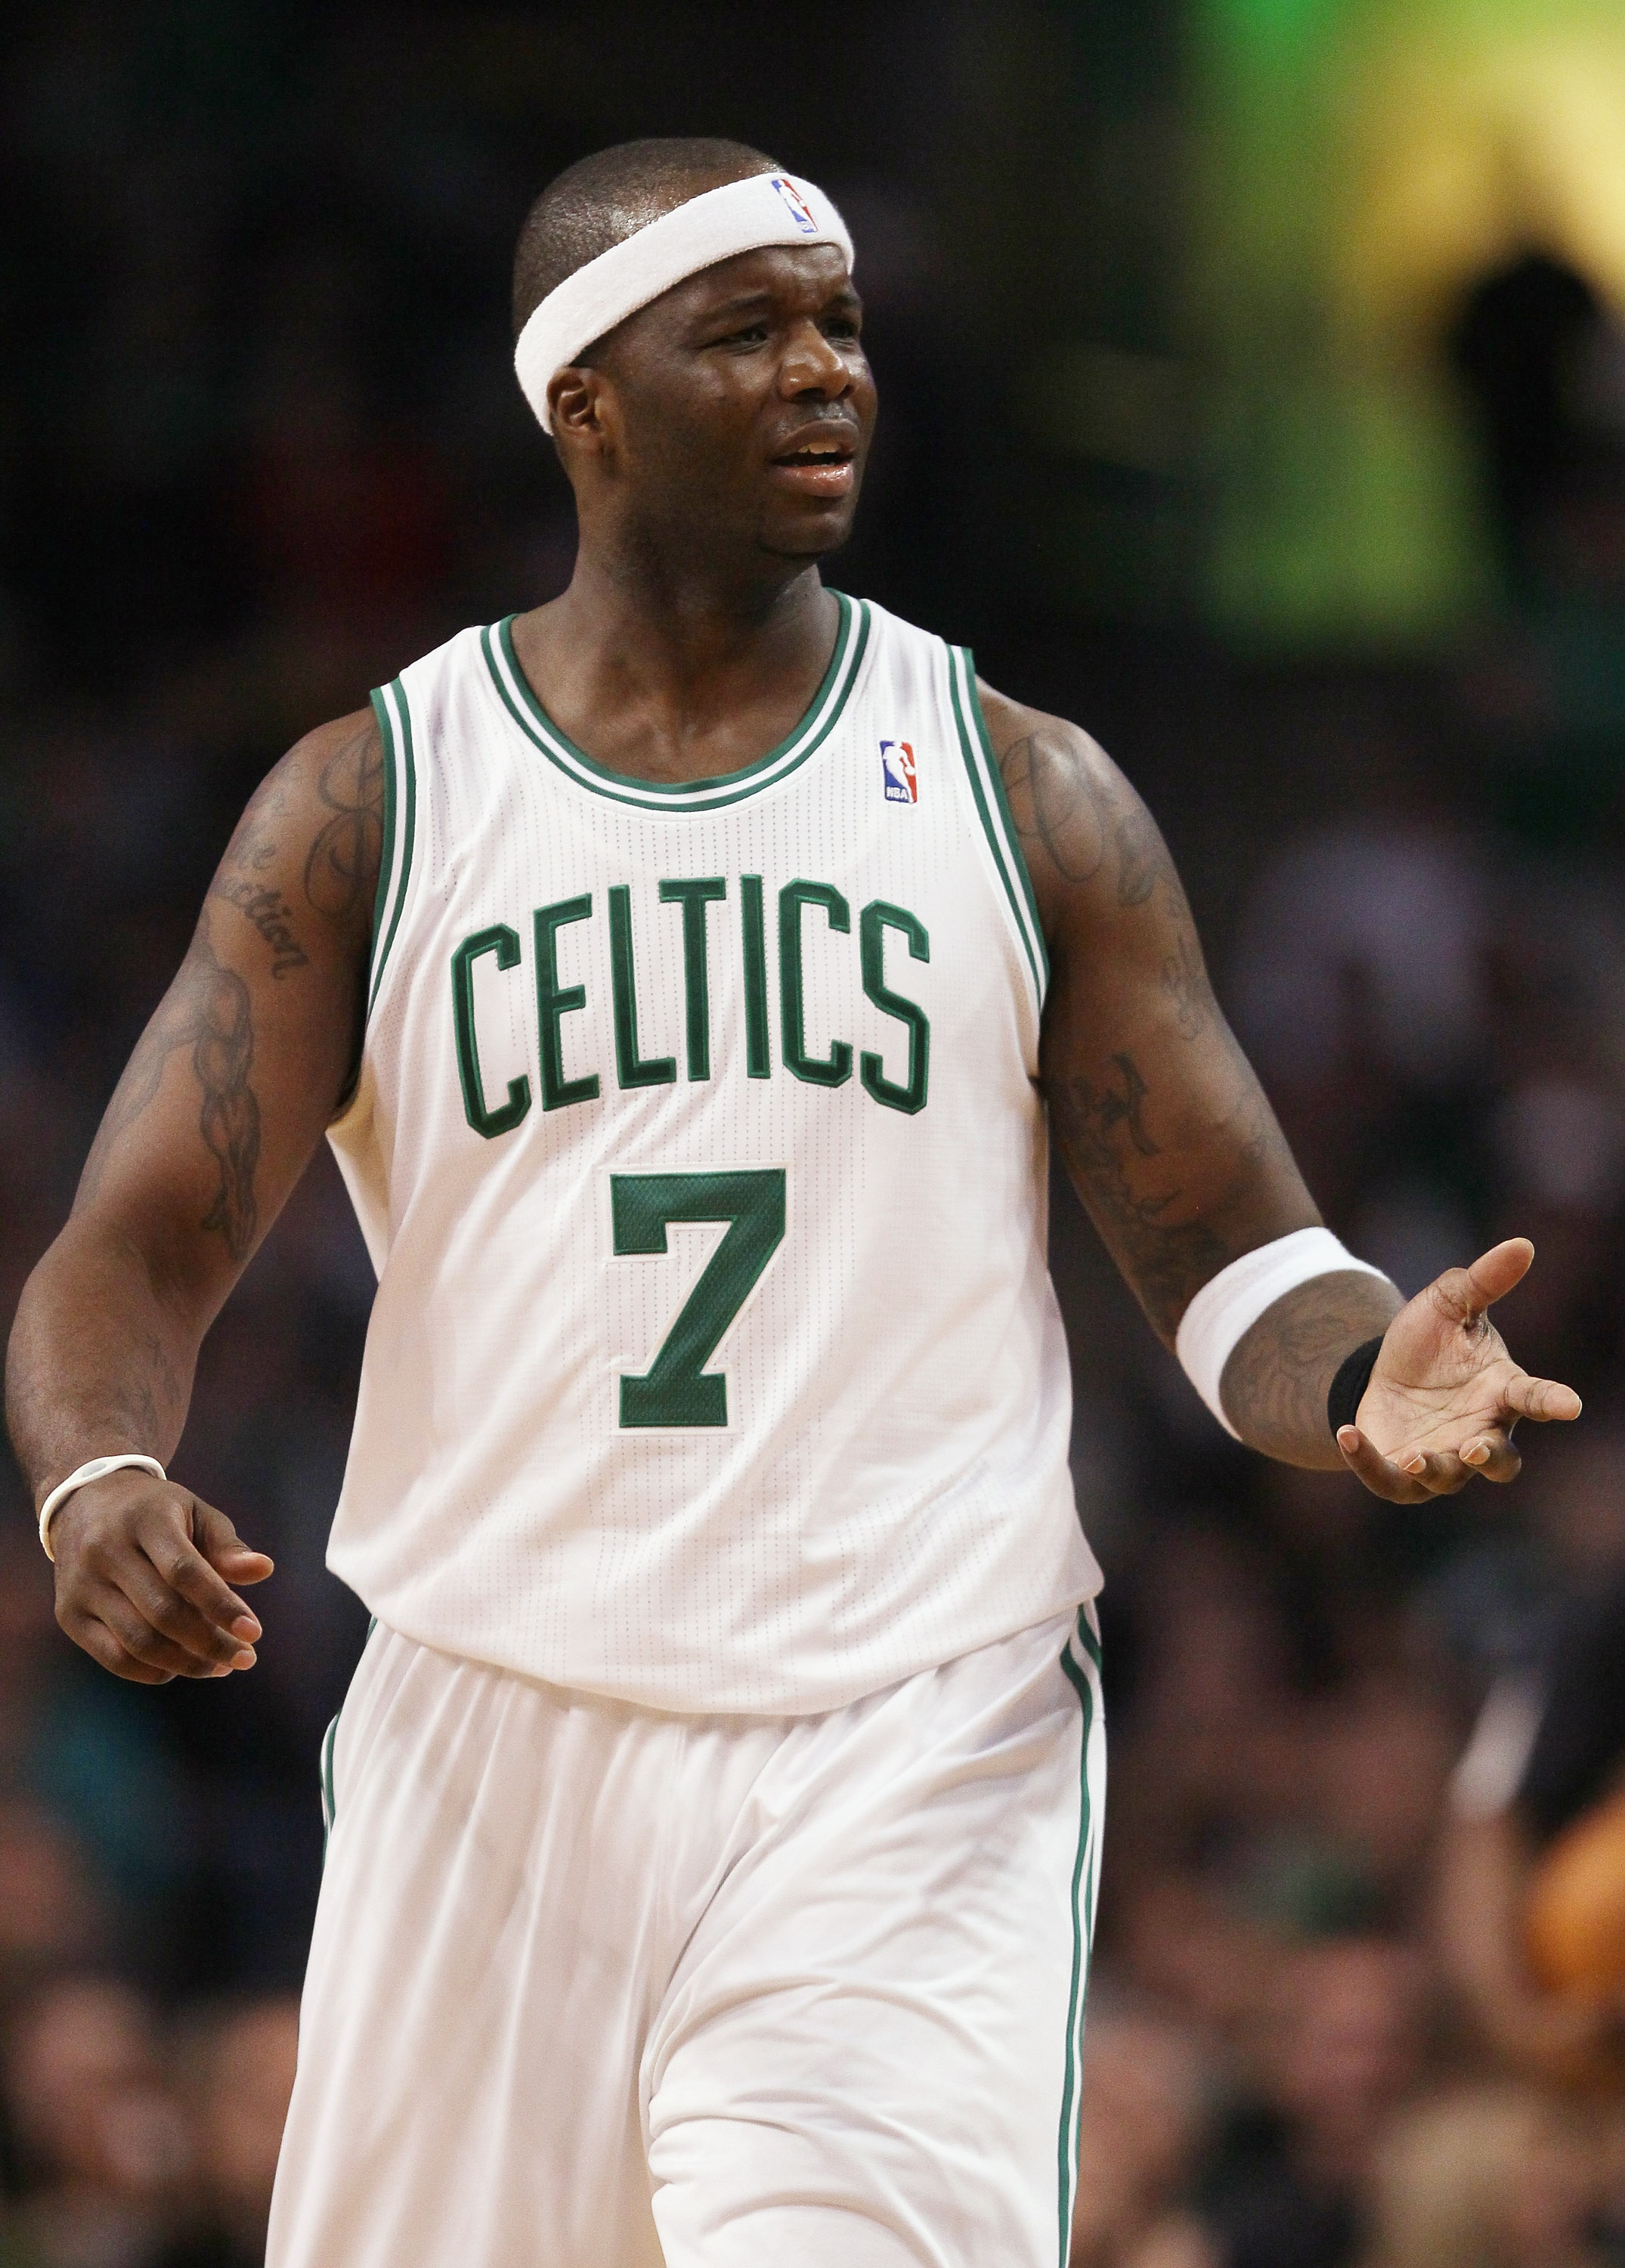 BOSTON, MA - JANUARY 03:  Jermaine O'Neal #7 of the Boston Celtics reacts after he is called for a foul in the first half against the Minnesota Timberwolves on January 3, 2011 at the TD Garden in Boston, Massachusetts. NOTE TO USER: User expressly acknowl